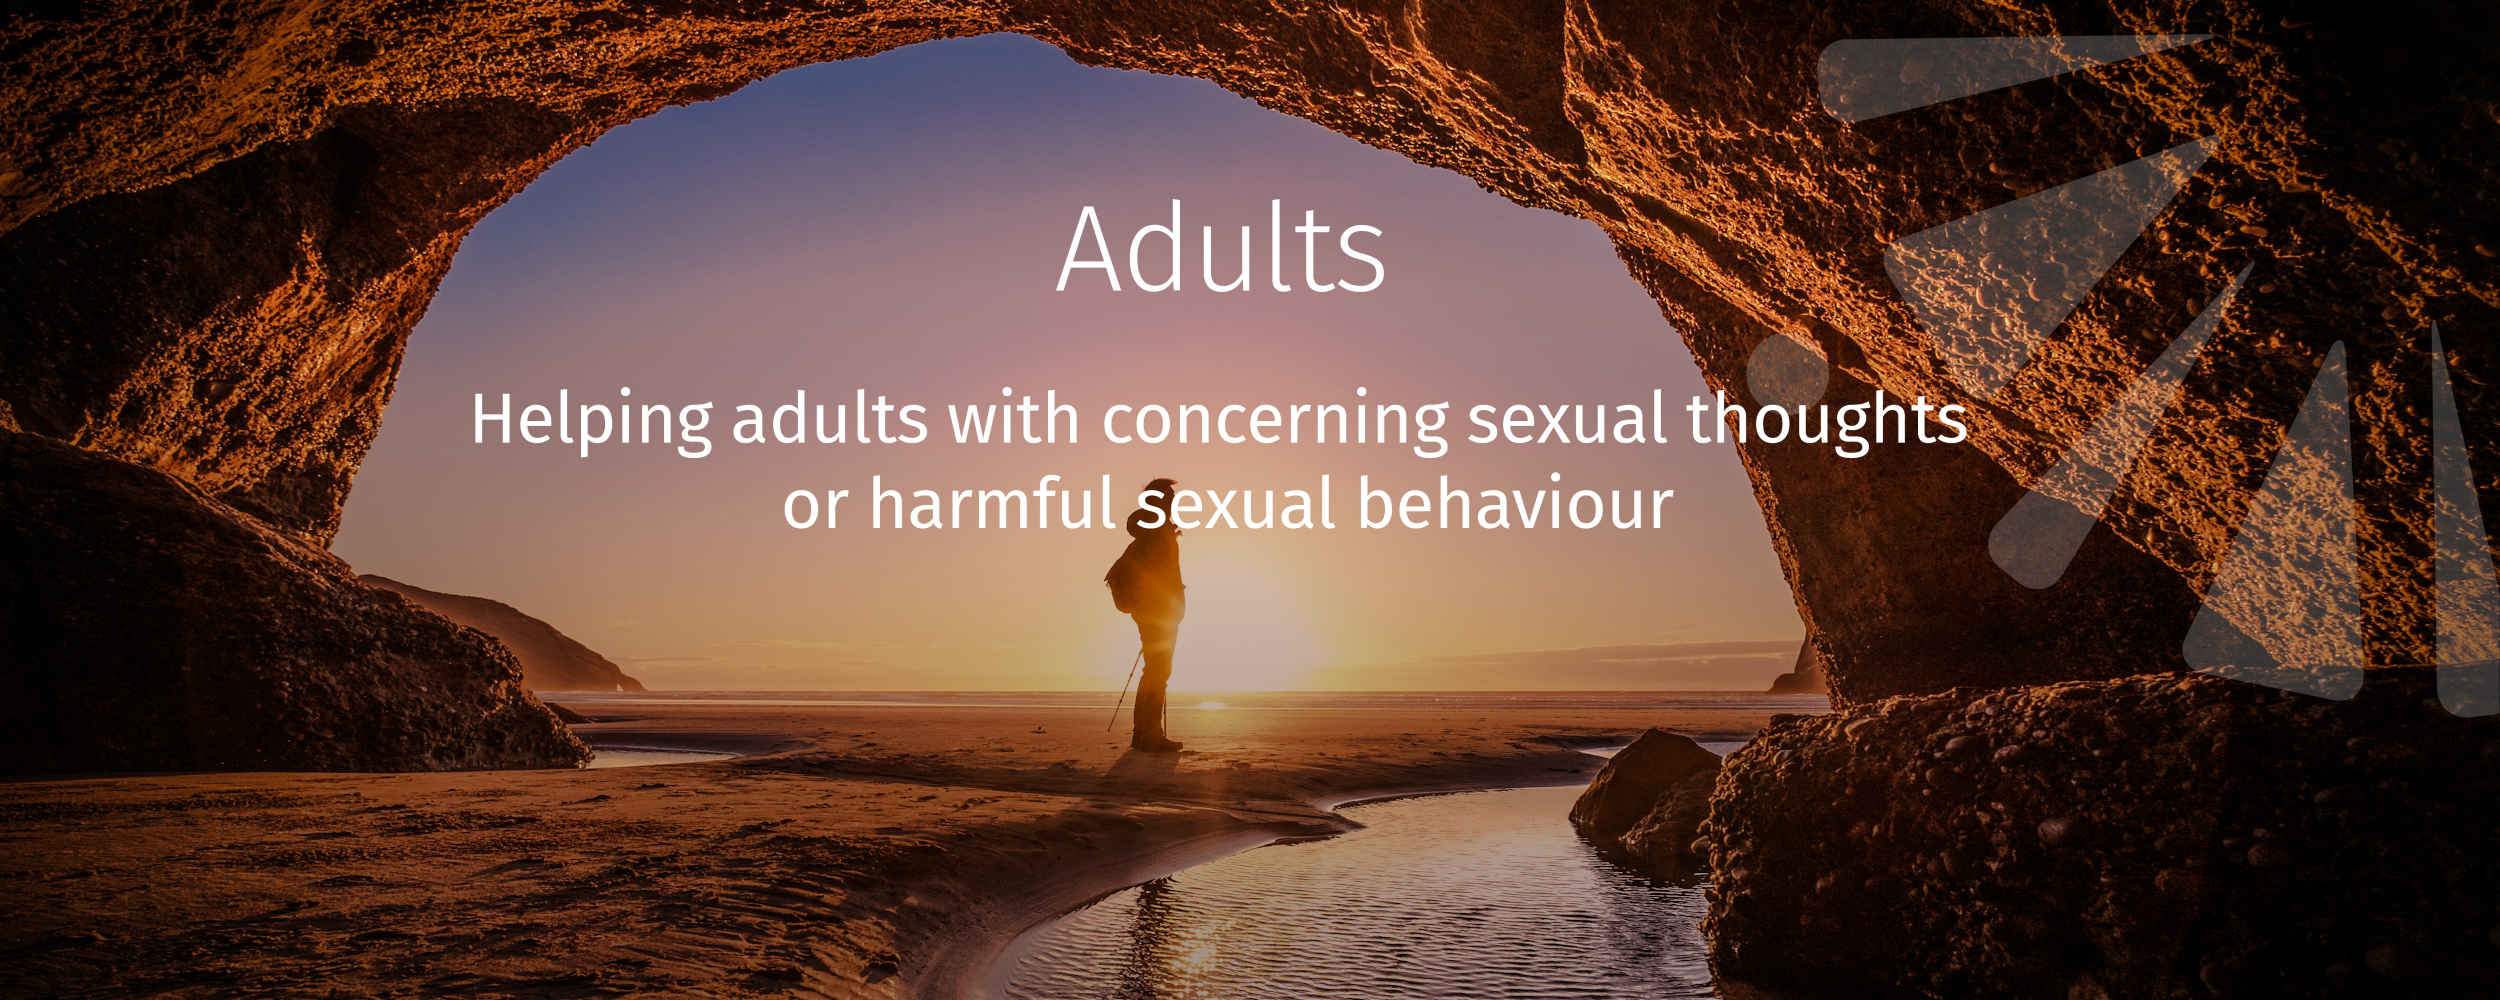 Helping Adults with concerning sexual thoughts or harmful sexual behaviour.